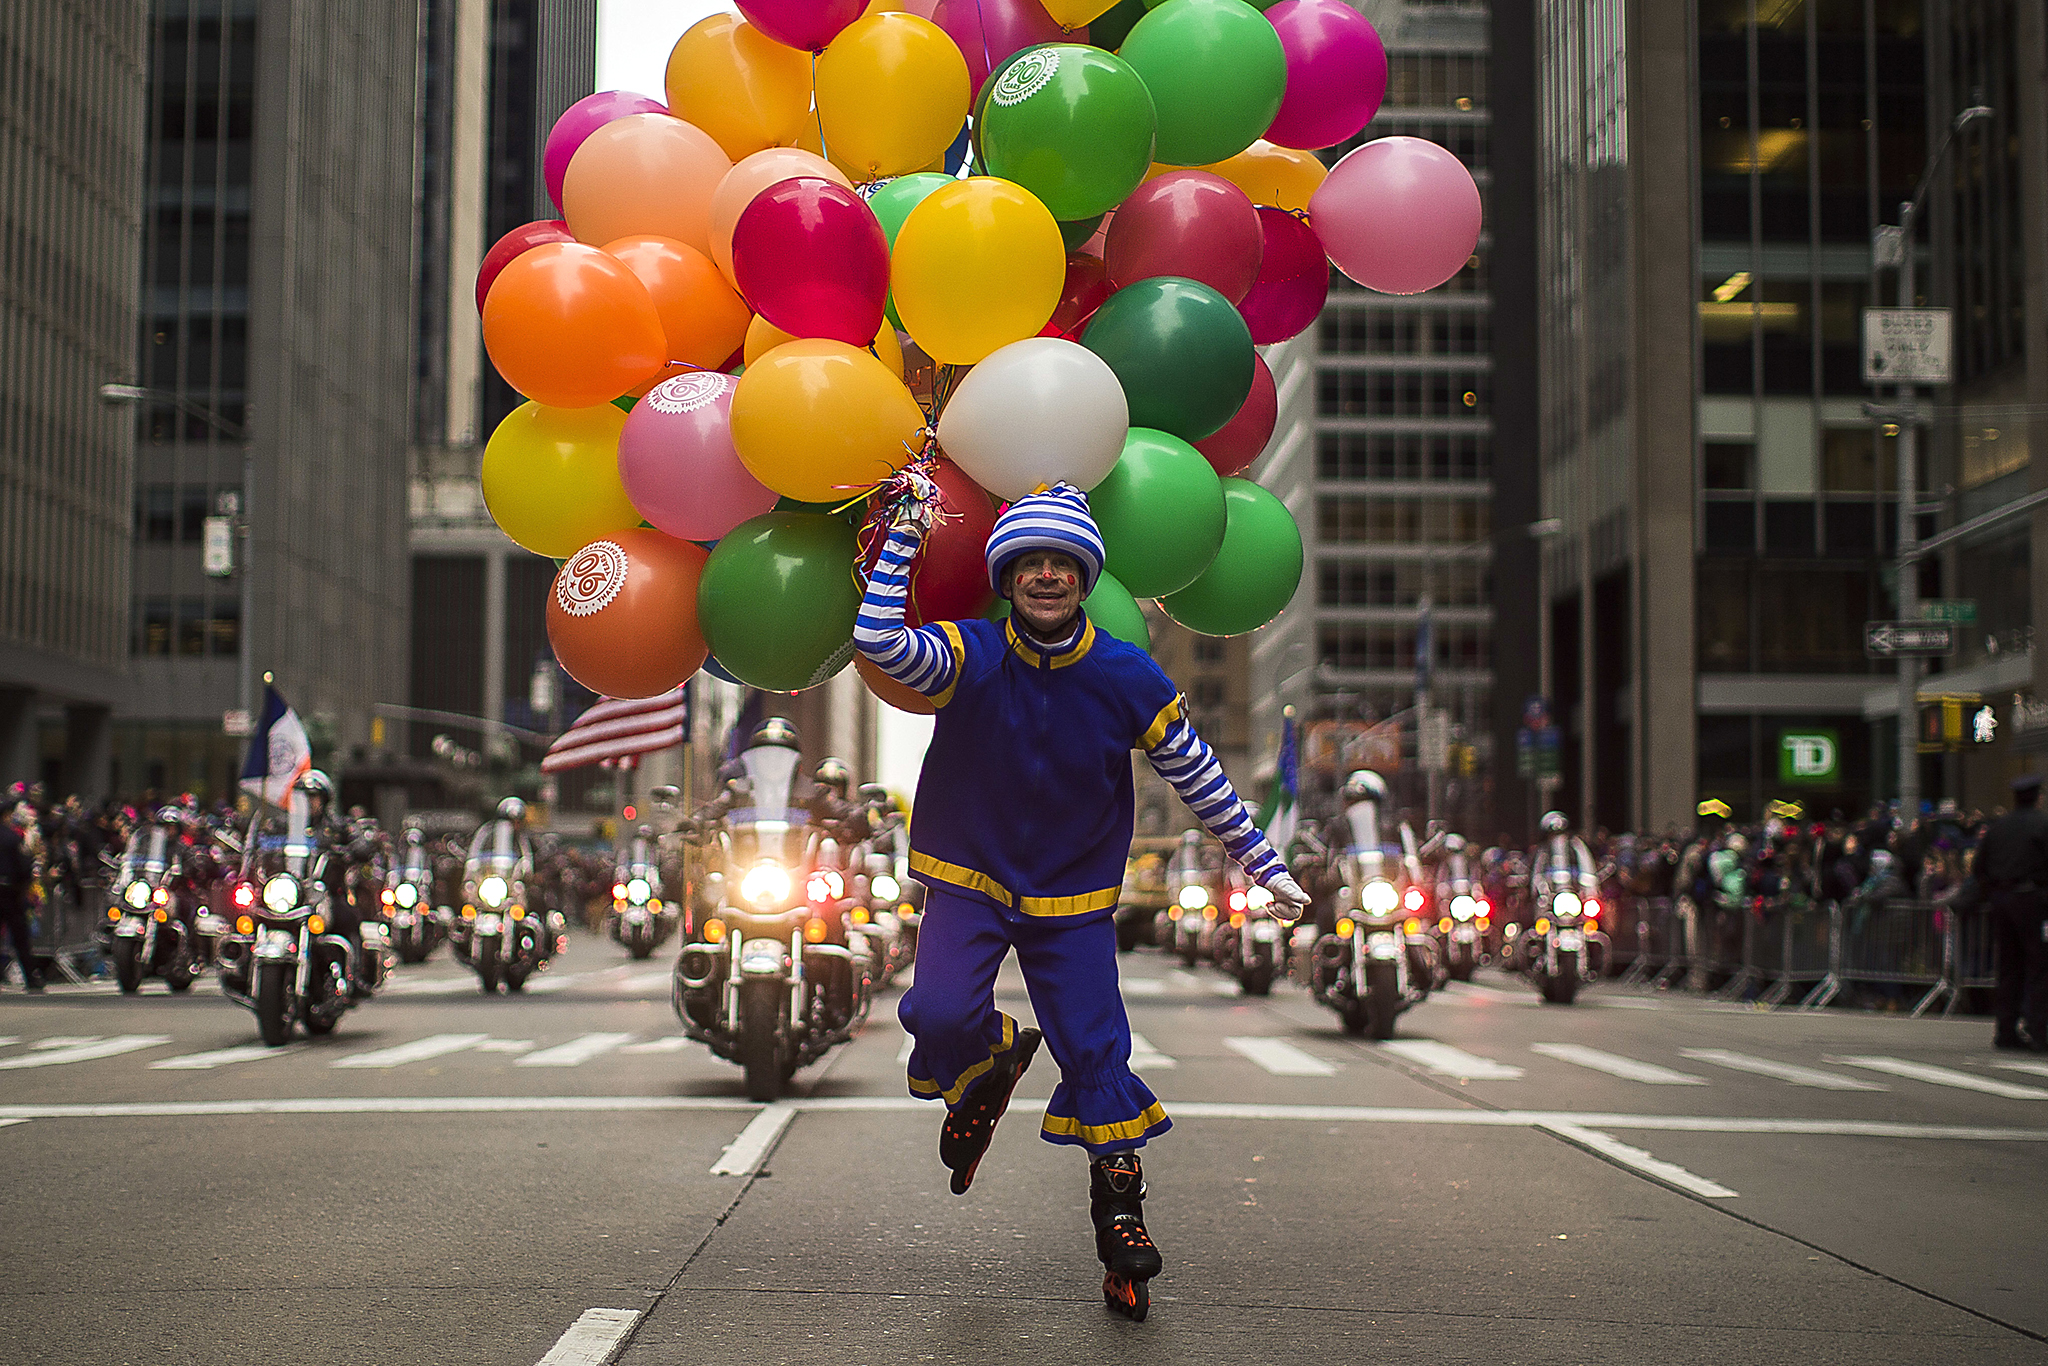 A performer carries balloons across Sixth Avenue during the Macy's Thanksgiving Day Parade, in New York, Thursday, Nov. 24, 2016. (AP Photo/Andres Kudacki)